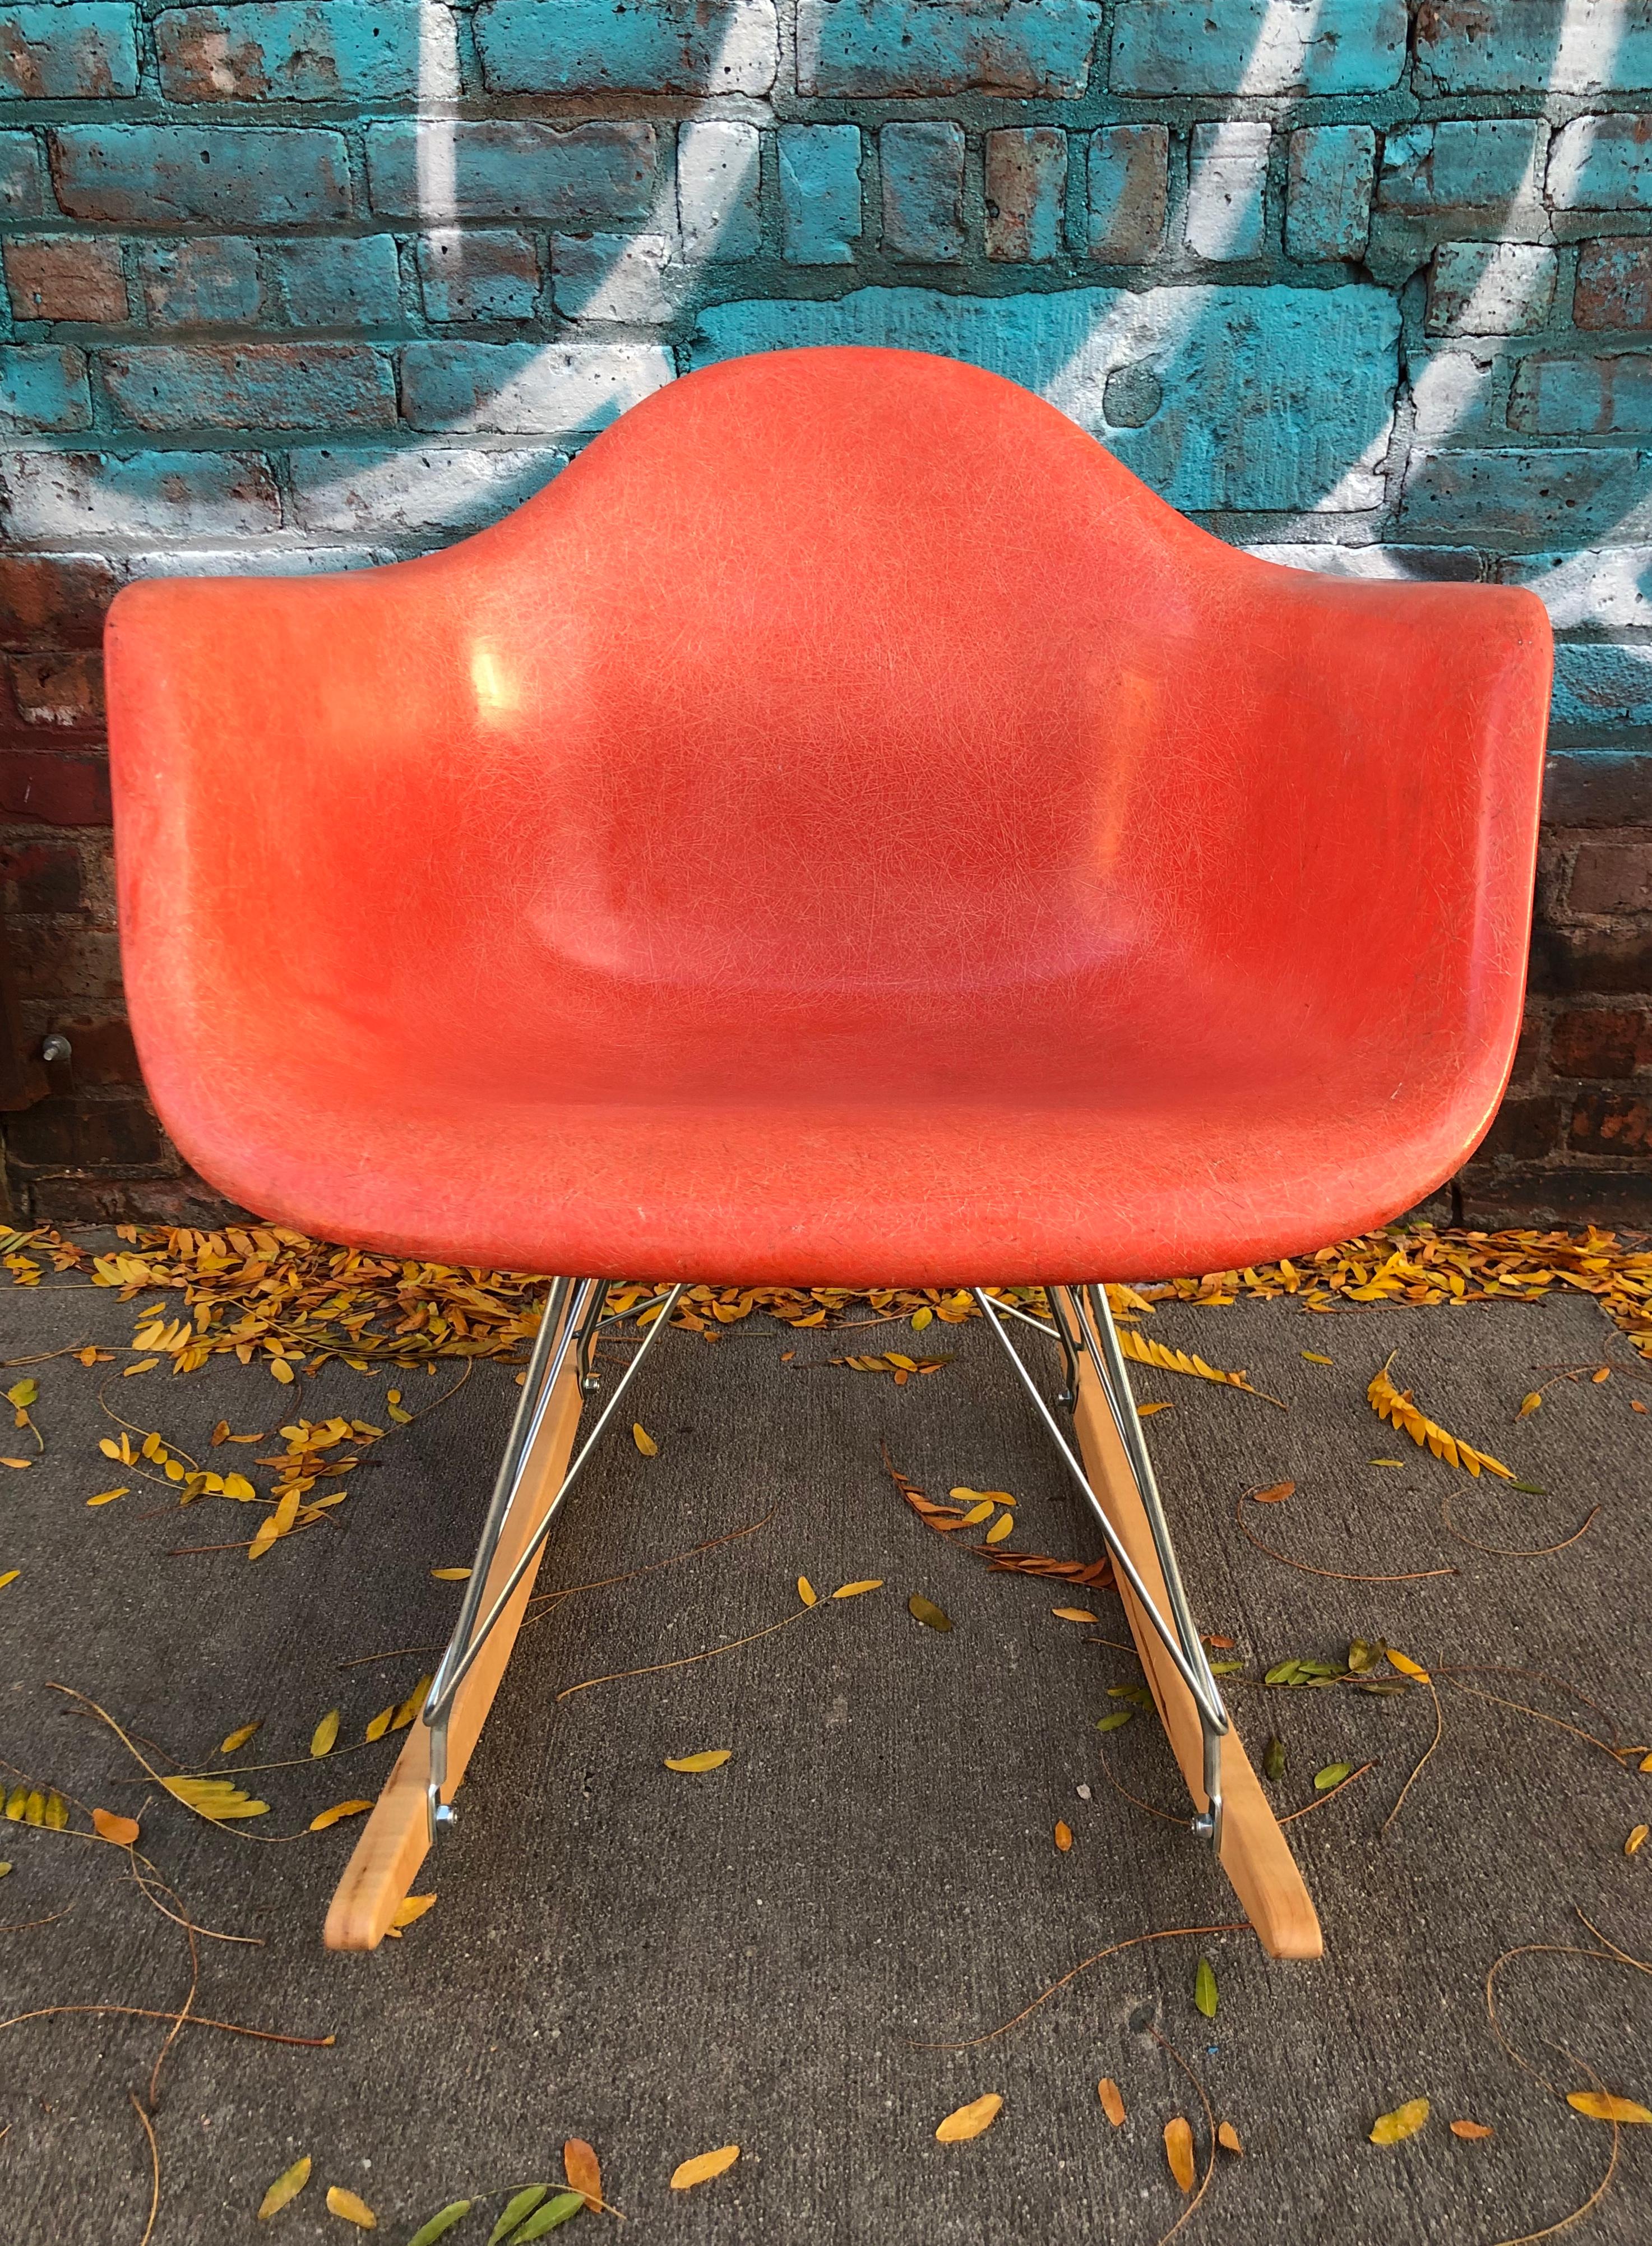 Gorgeous example of the Classic Herman Miller Eames RAR rocking chair. Vintage signed shell in good condition with no damage besides light normal wear. Sits atop newer Modern Conscience base with silver metal and maple runners. Includes vintage